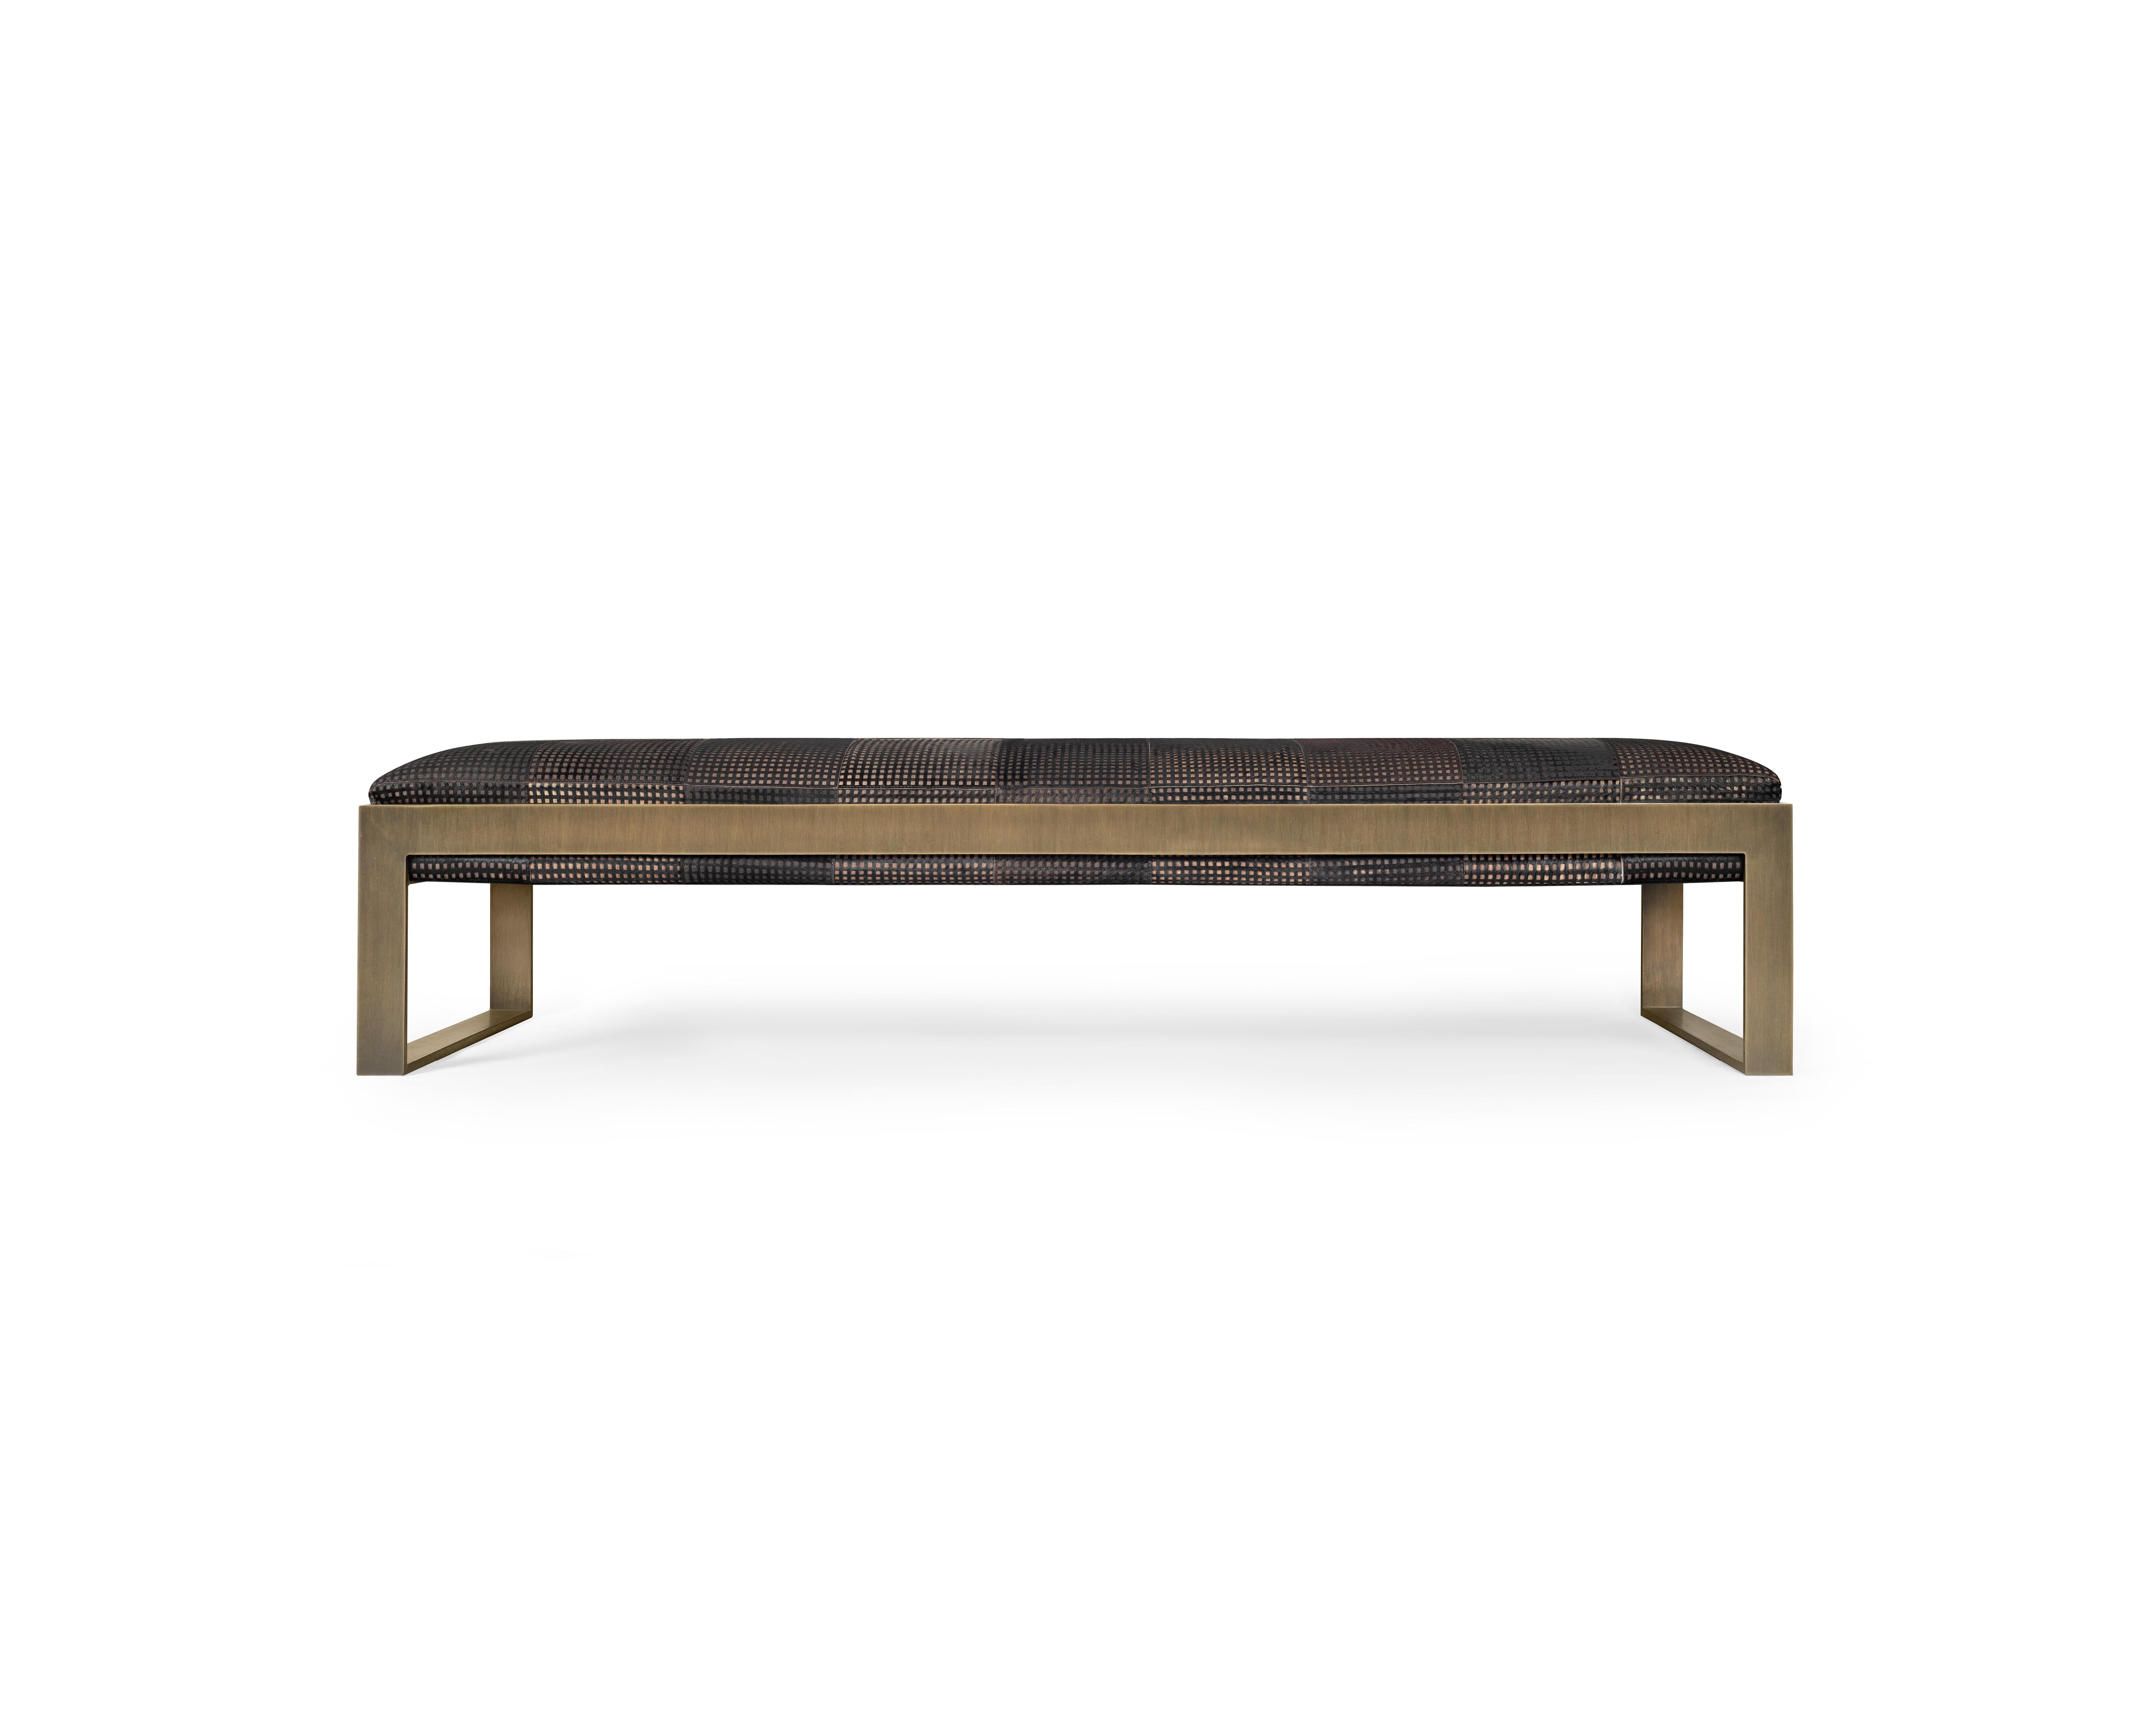 Other Etched Hair-On Upholstery Jacob Bench by Madheke For Sale